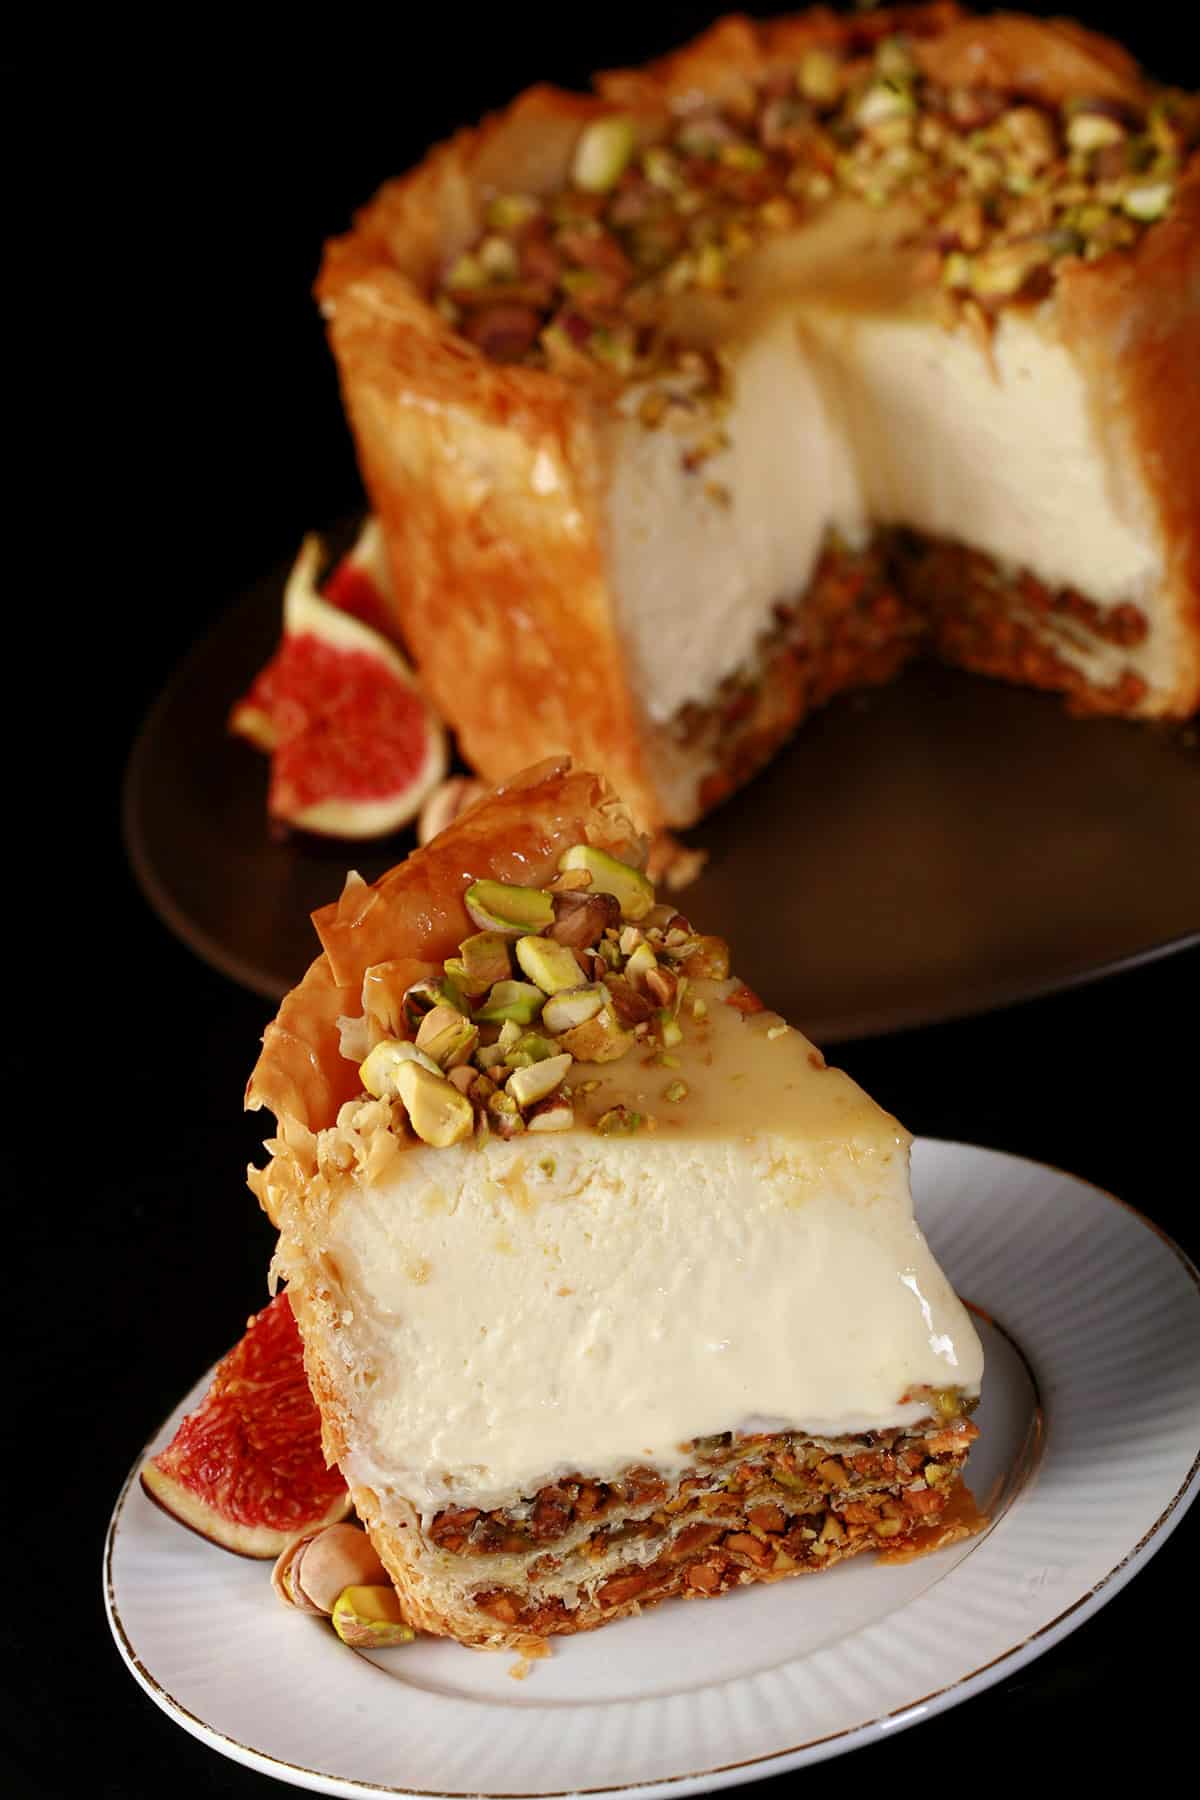 A slice of baklava cheesecake, in front of the rest of the mini cheesecake.